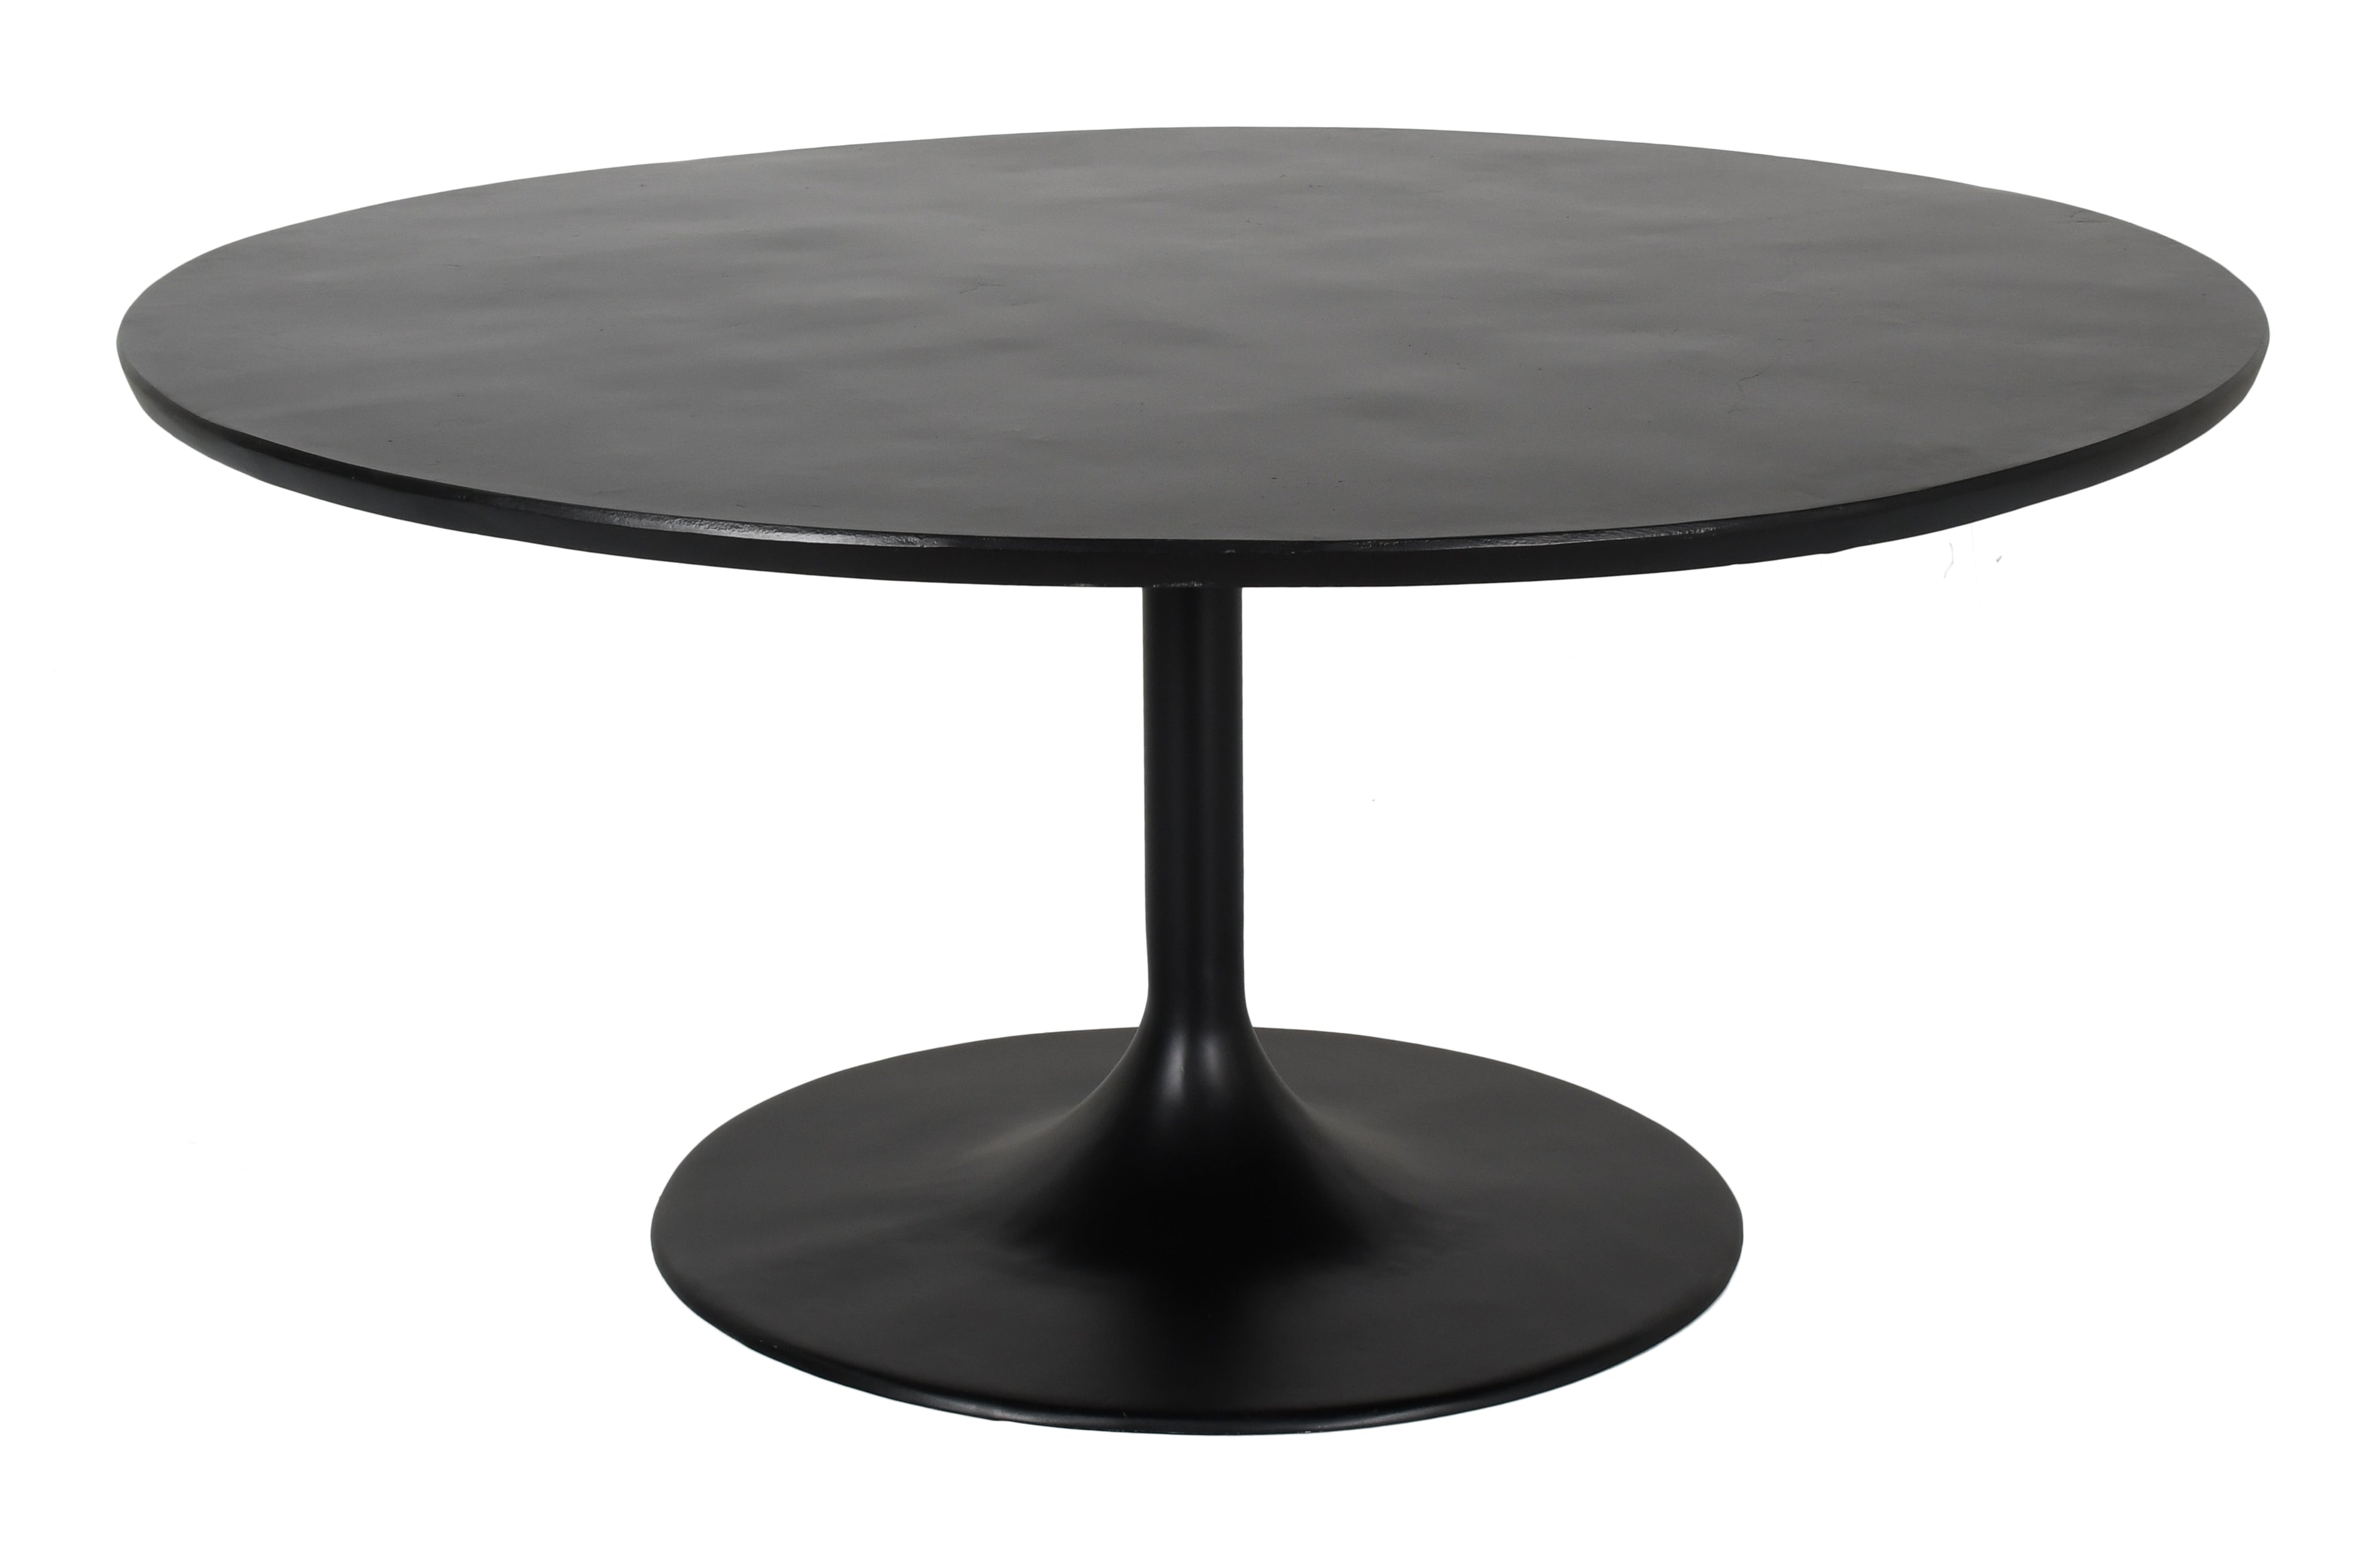 Tulip 72" Round Dining Table By Castelle